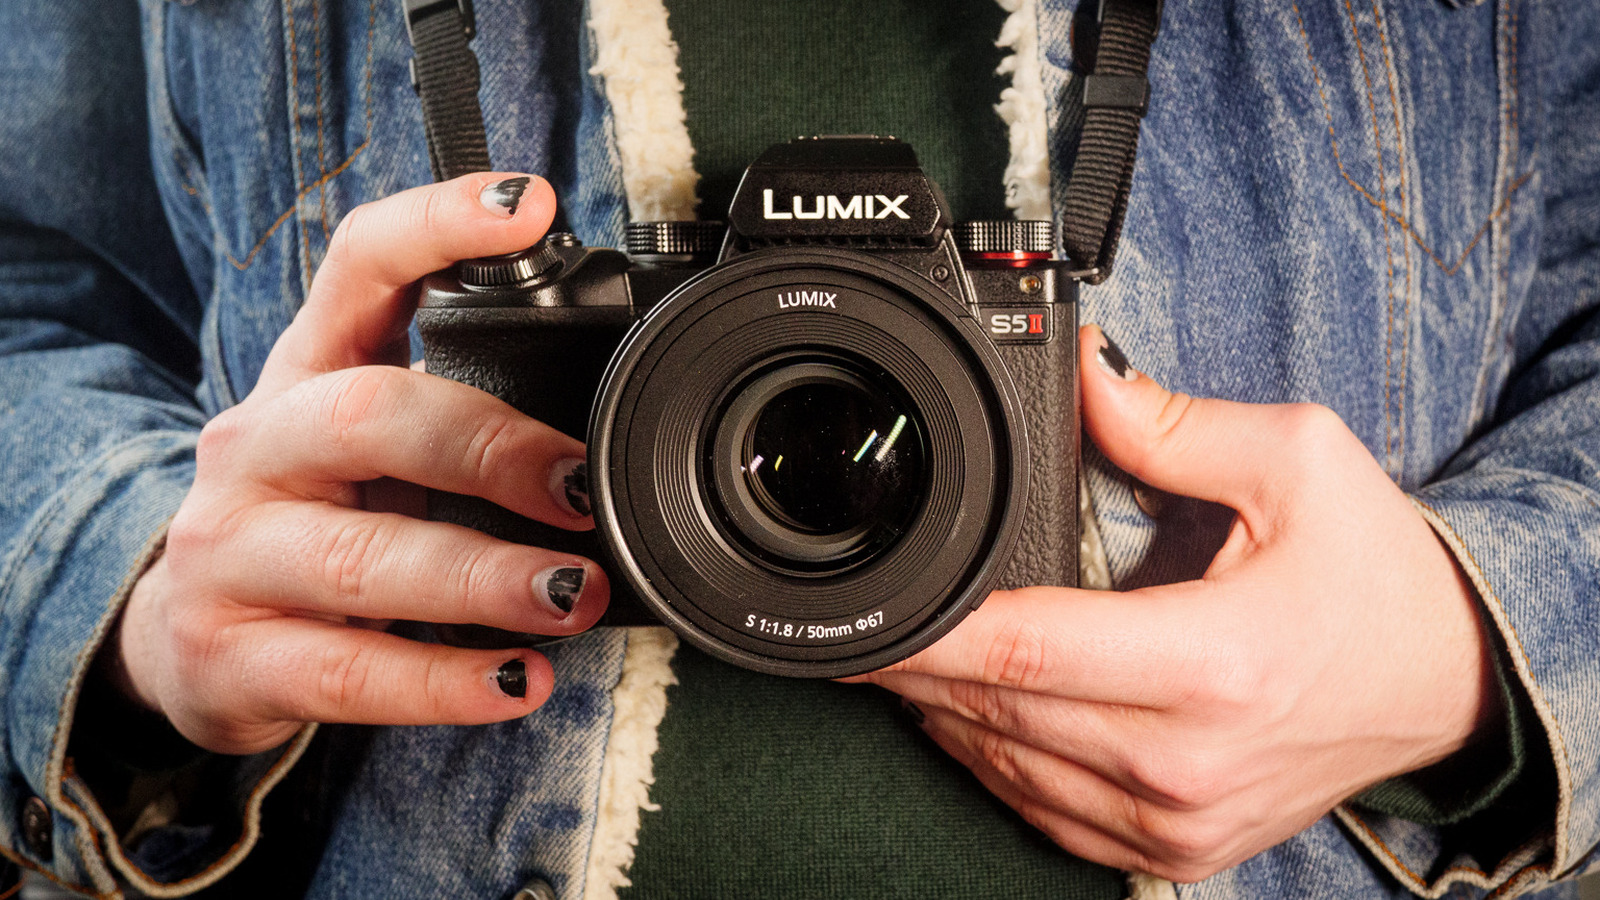 Panasonic Lumix S5 long term review: Small, capable, and priced to